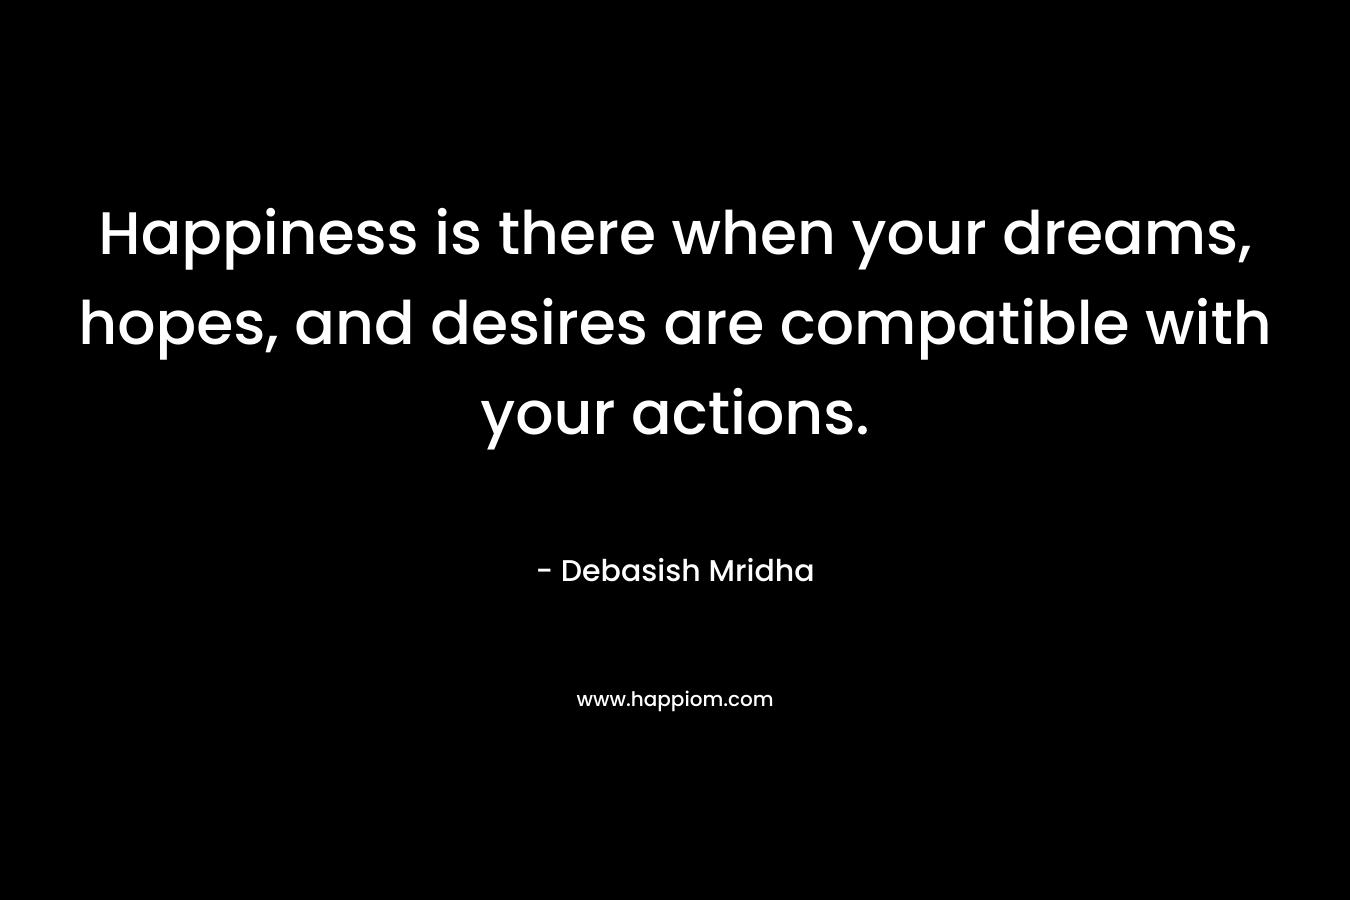 Happiness is there when your dreams, hopes, and desires are compatible with your actions.